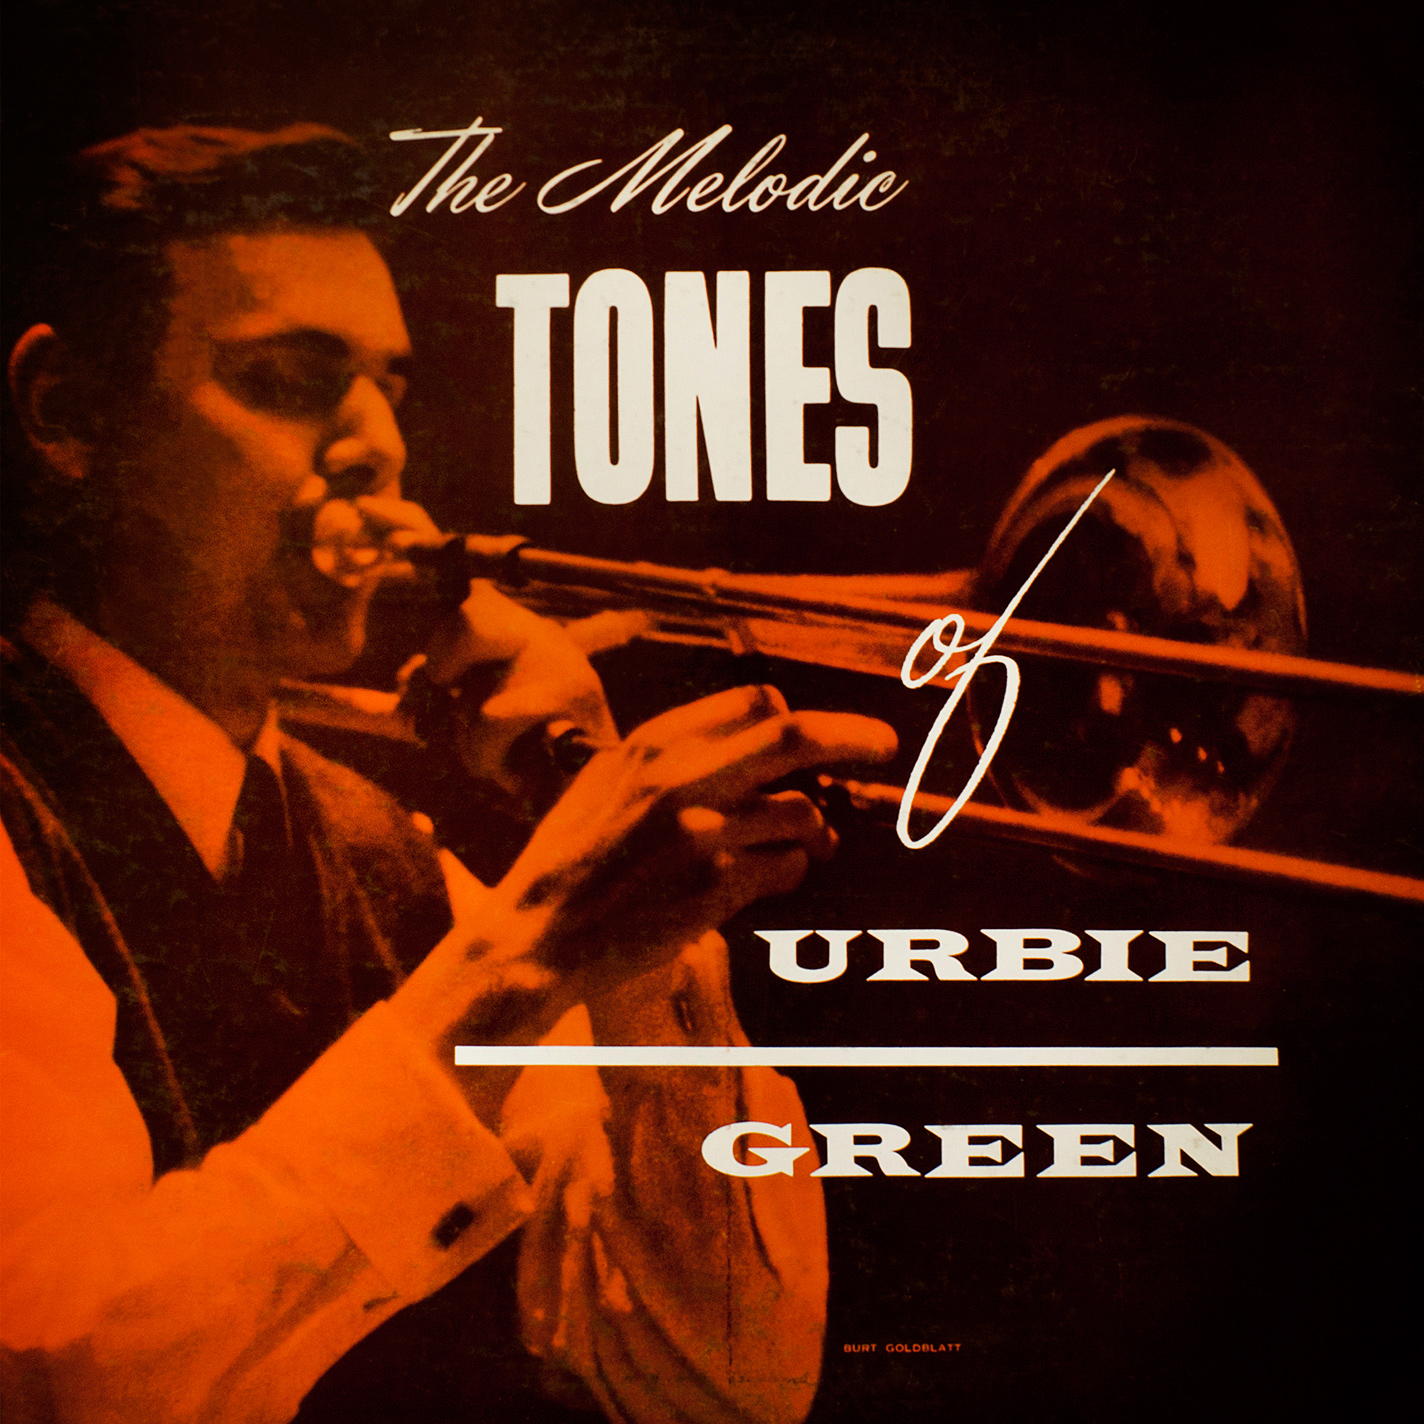 The Melodic Tones of Urbie Green